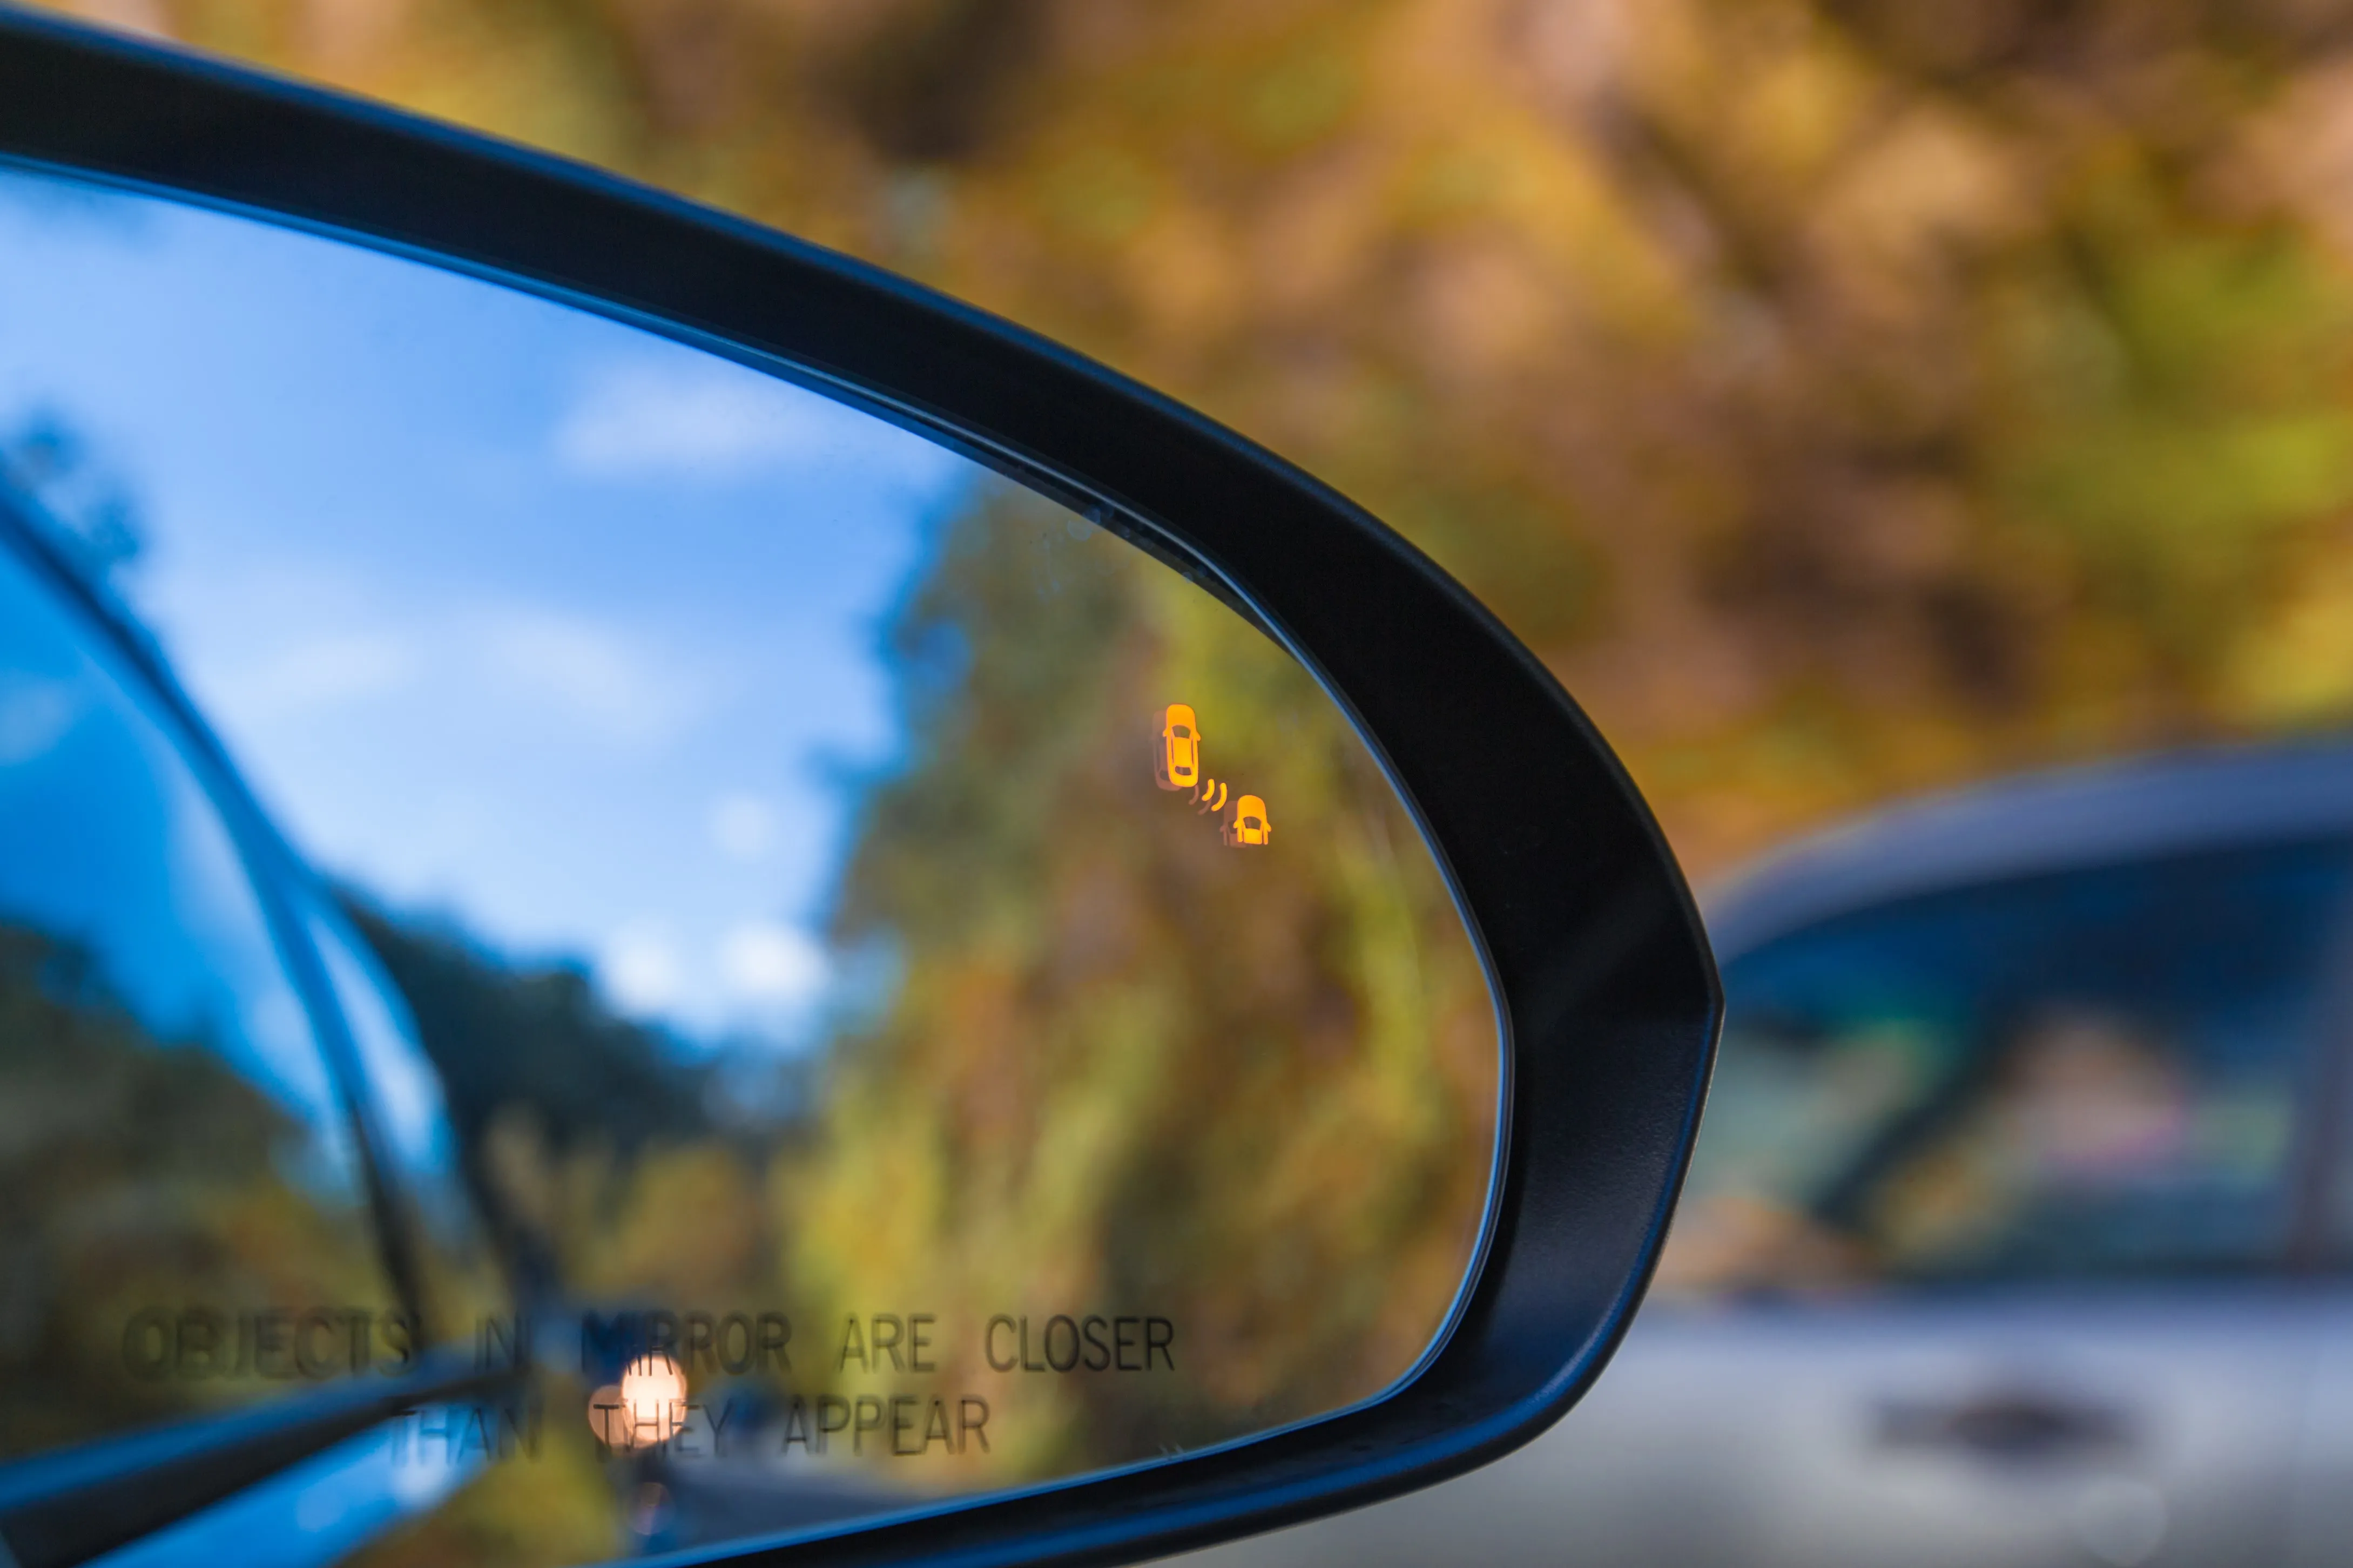 Some New Vehicles are Being Issued with a Blindspot Mirror